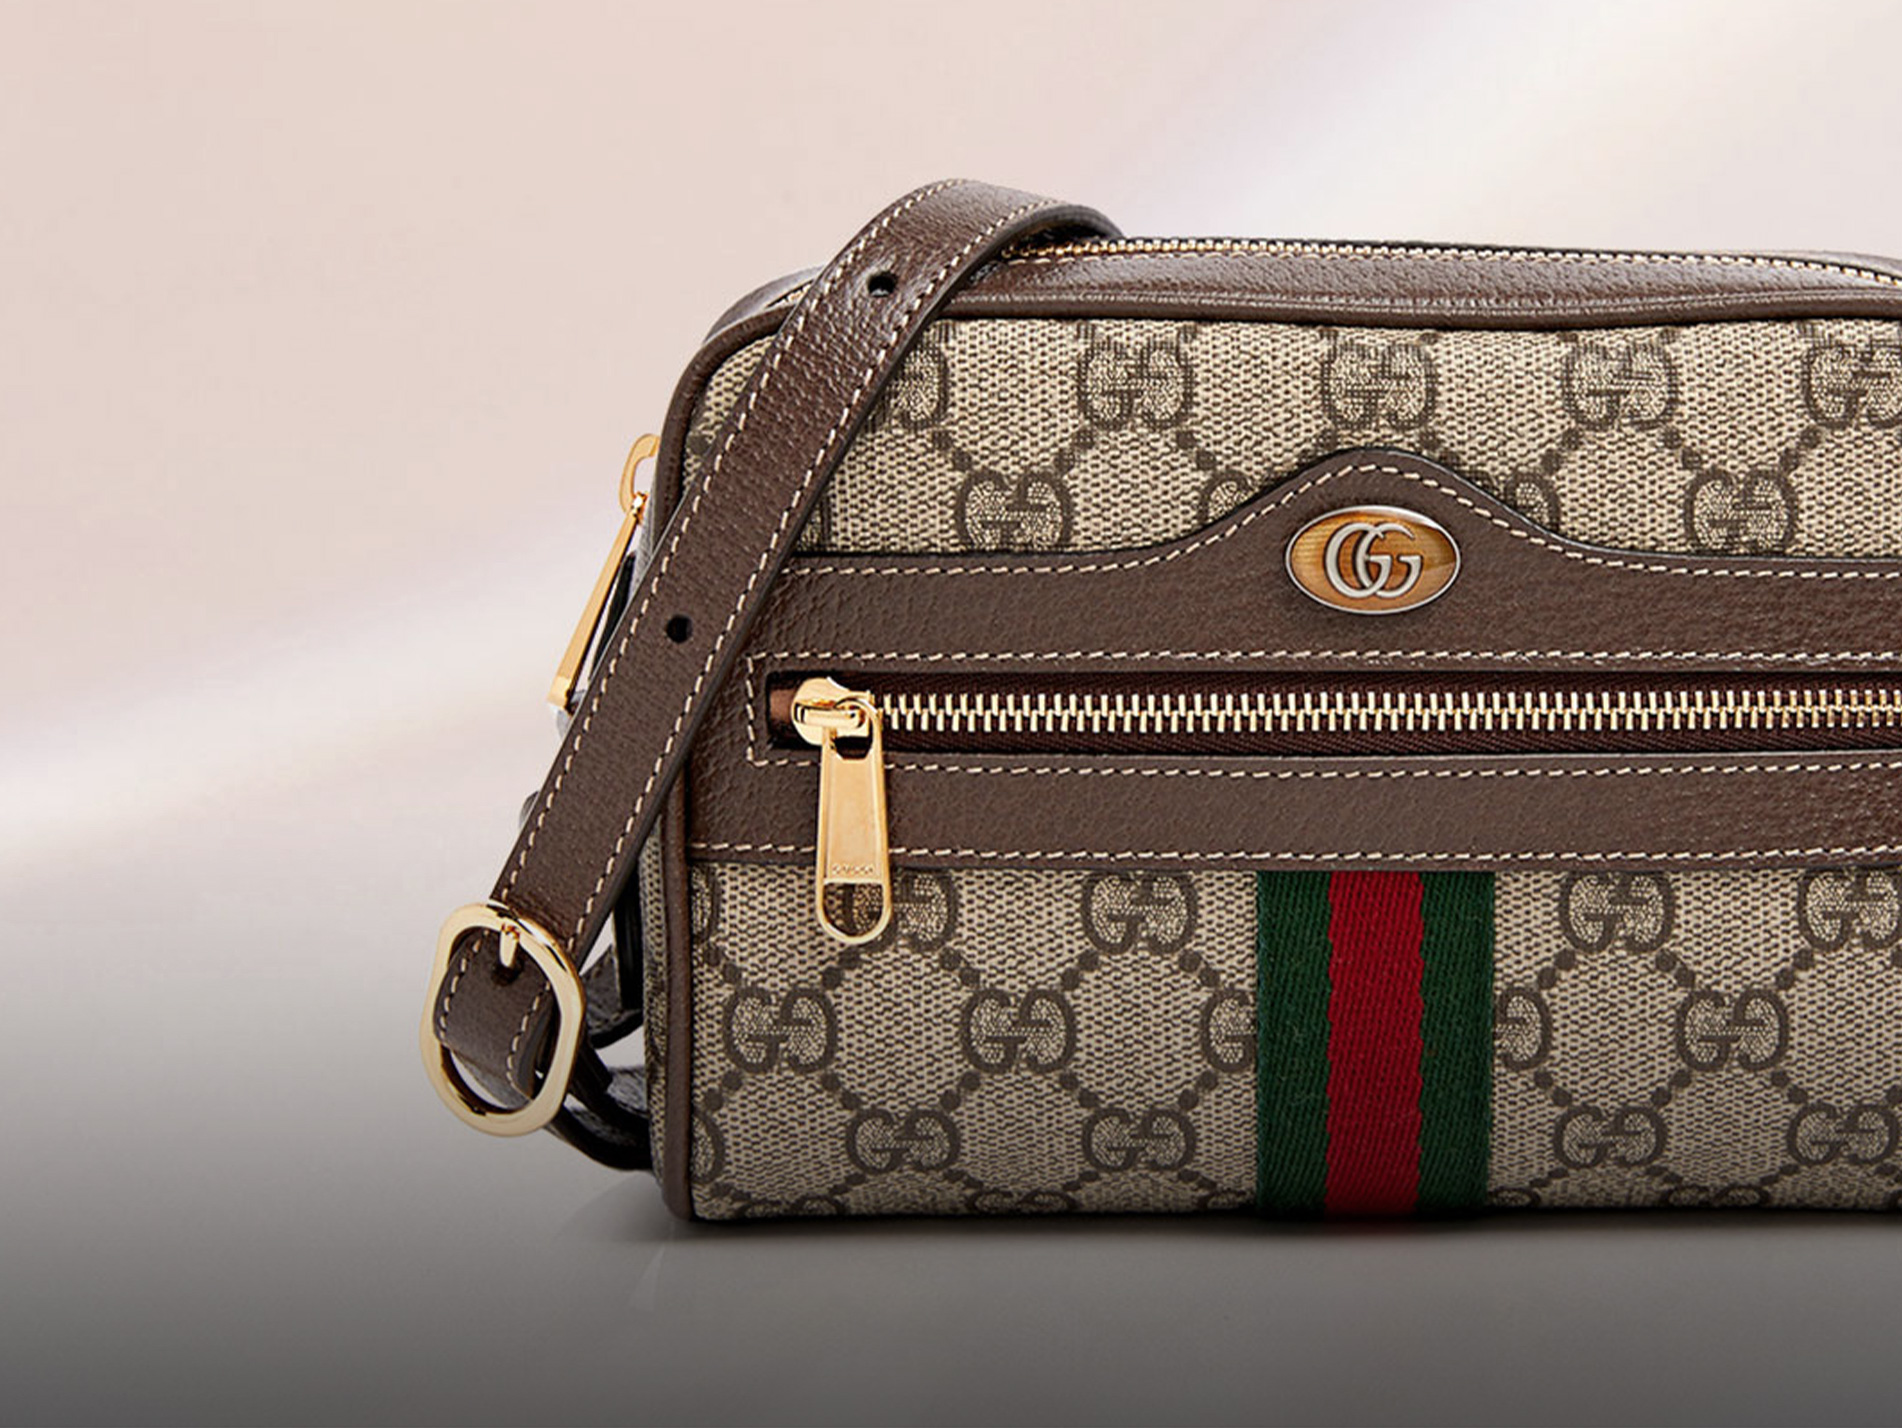 Gucci up to 55% off